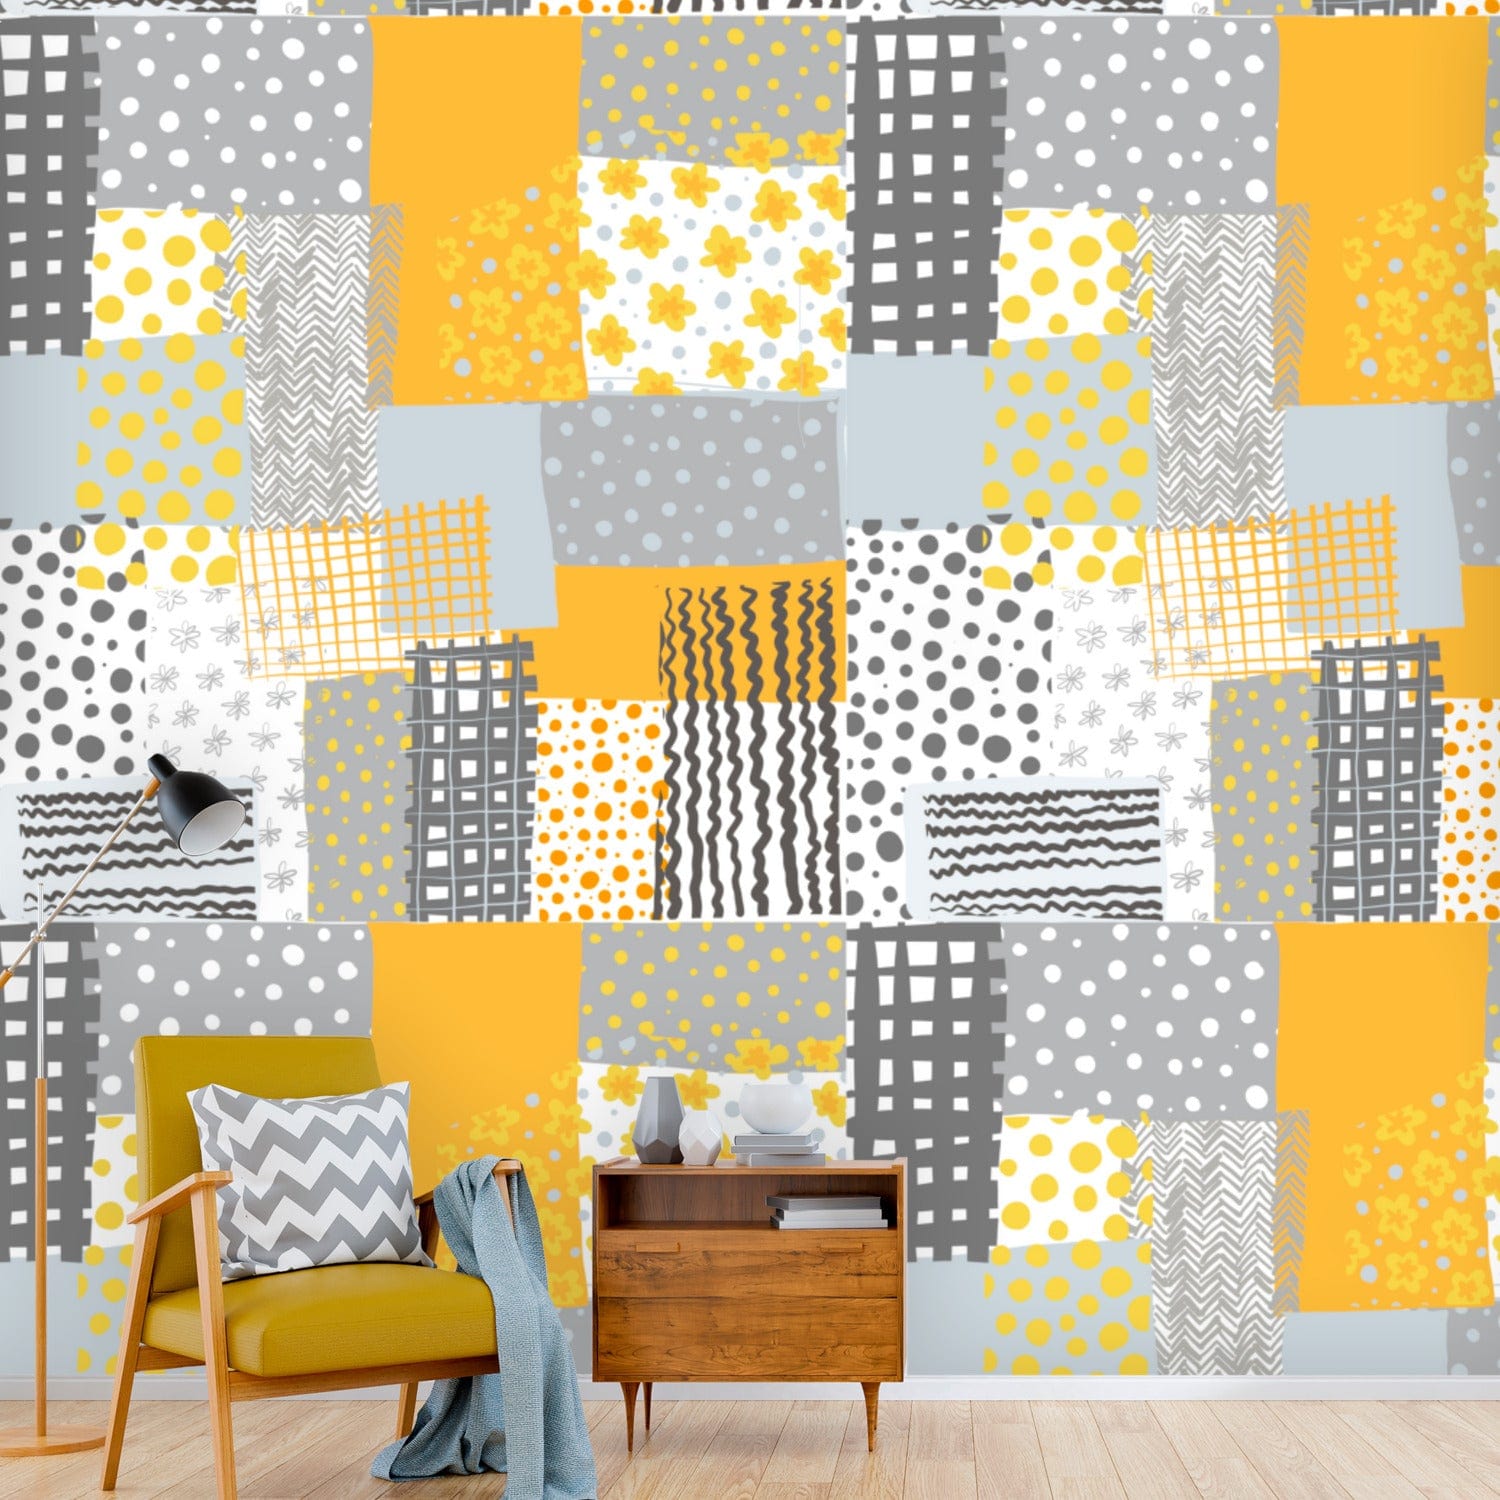 Retro Abstract Art, Peel And Stick, Gray, Yellow, White, Floral Mid Mod Wall Murals Wallpaper H110 x W120